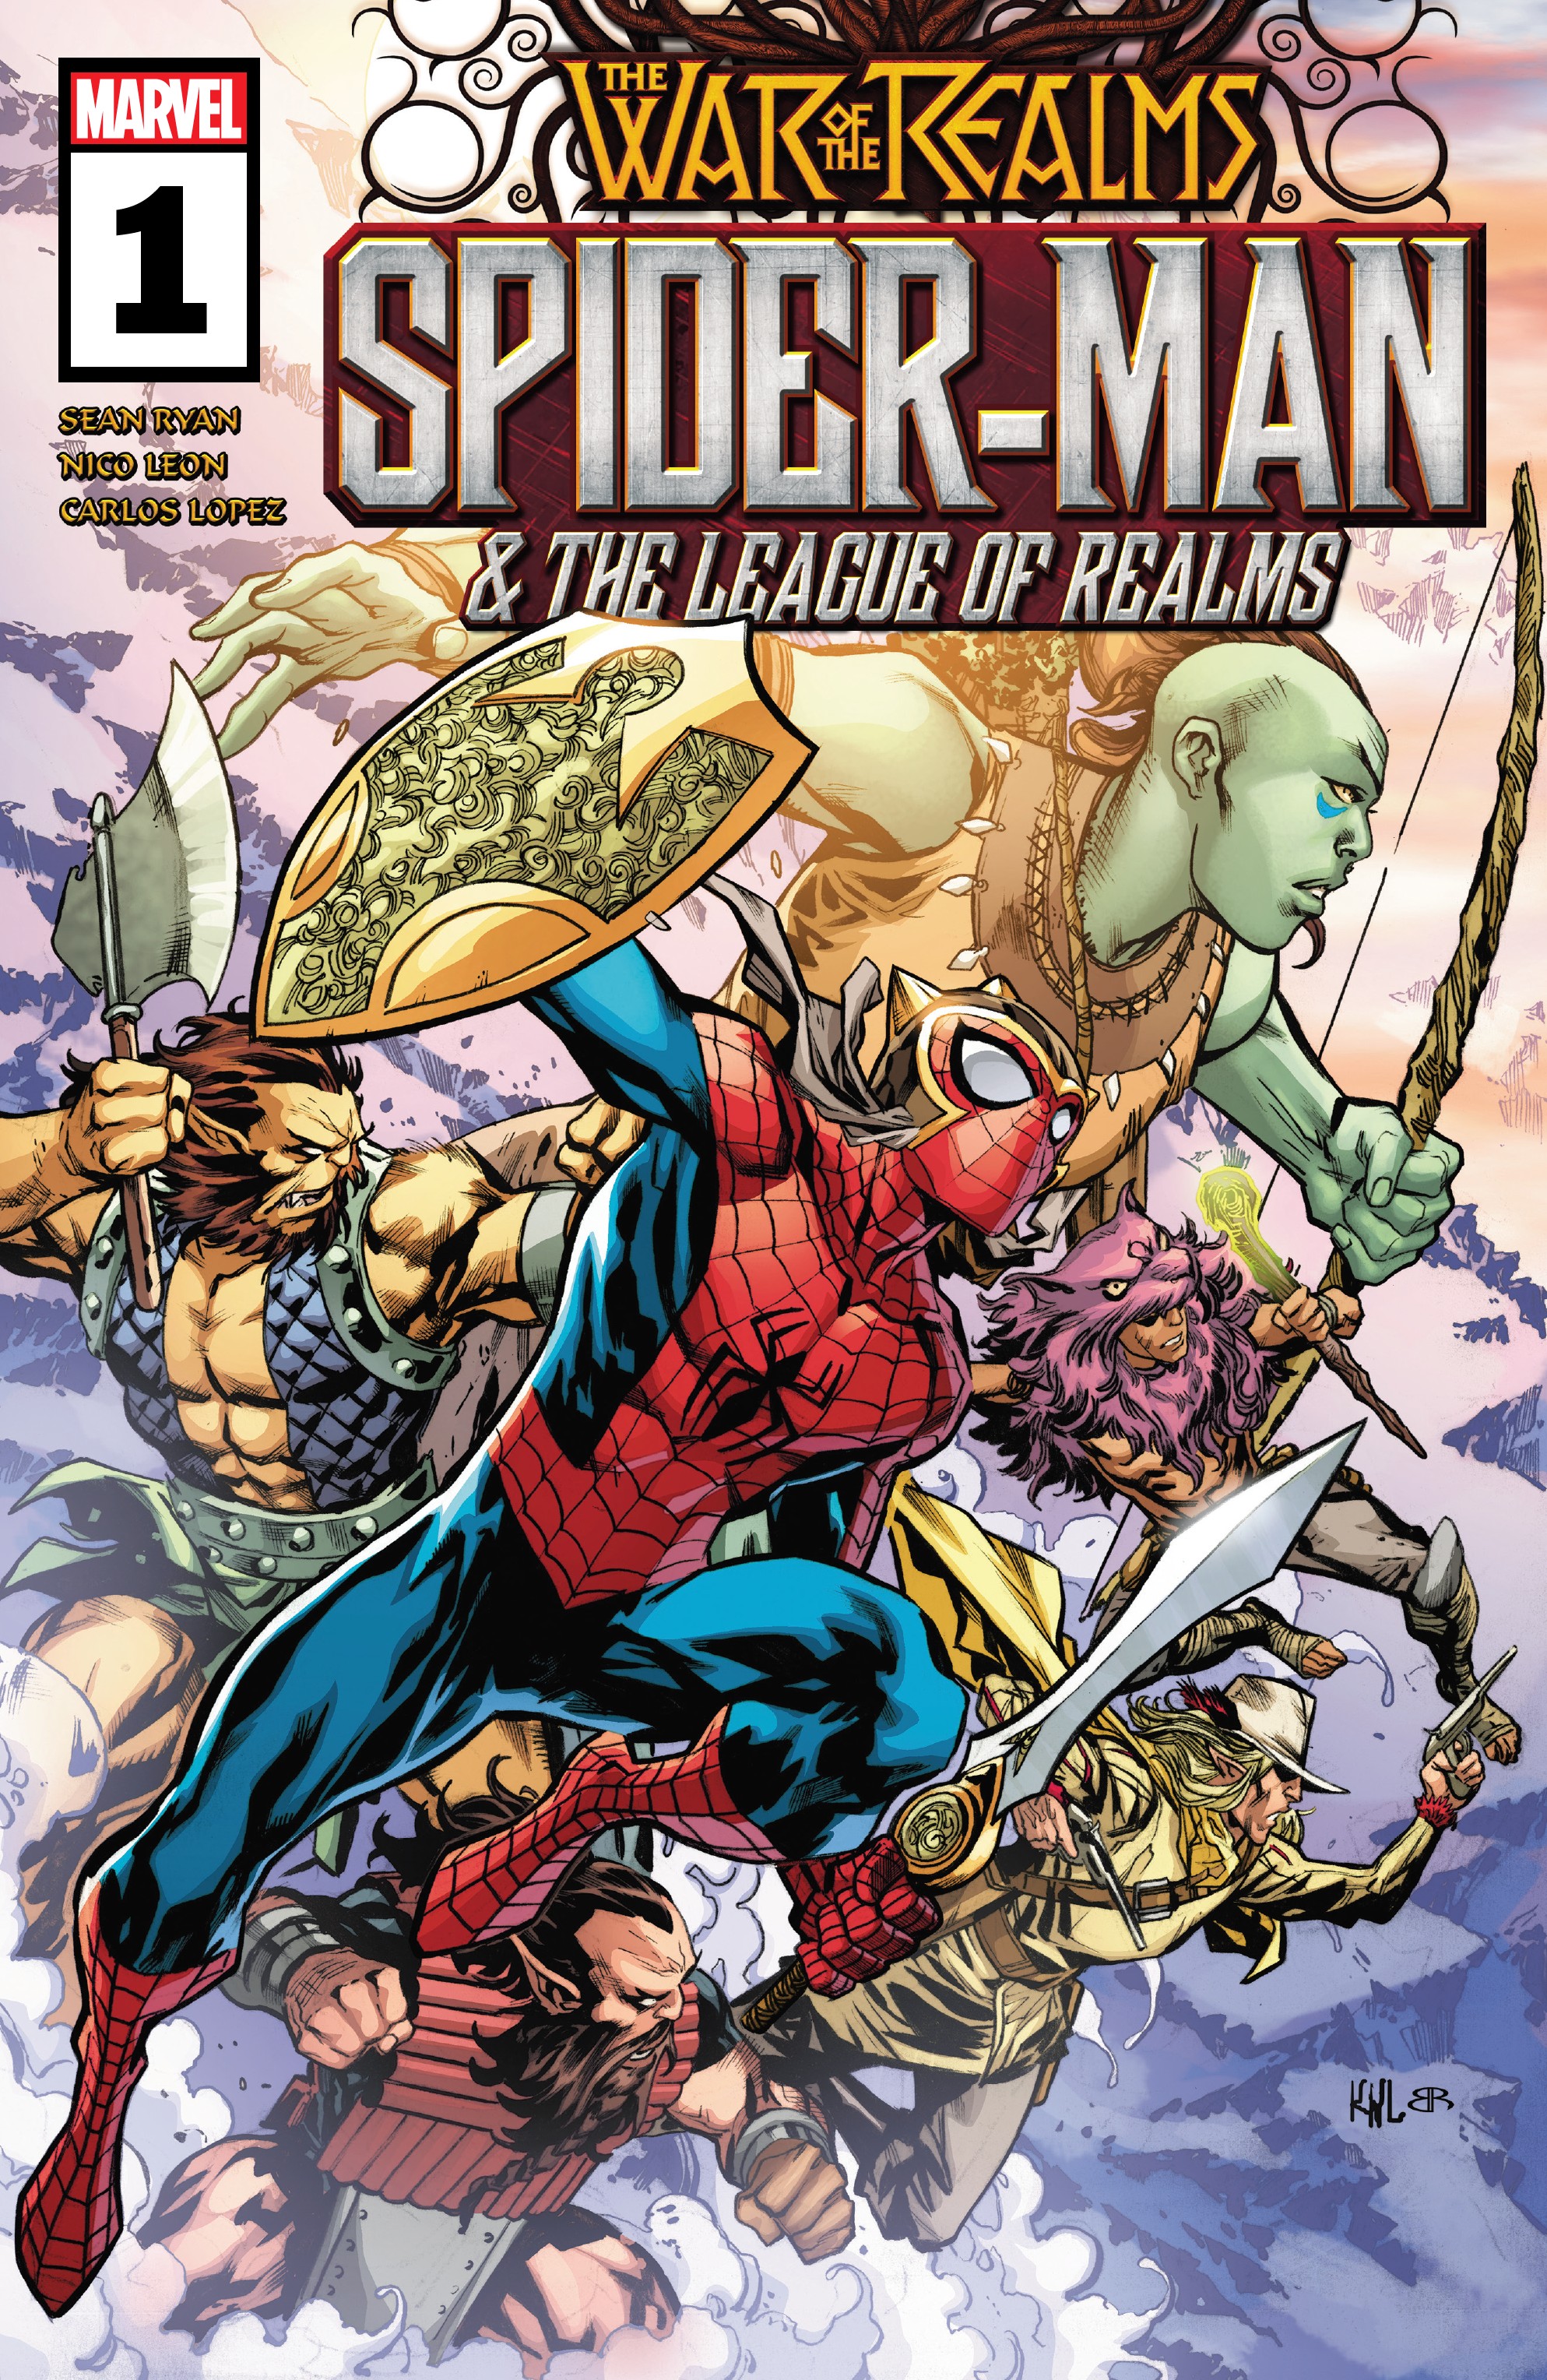 Read online War of the Realms: Spider-Man & the League of Realms comic -  Issue #1 - 1